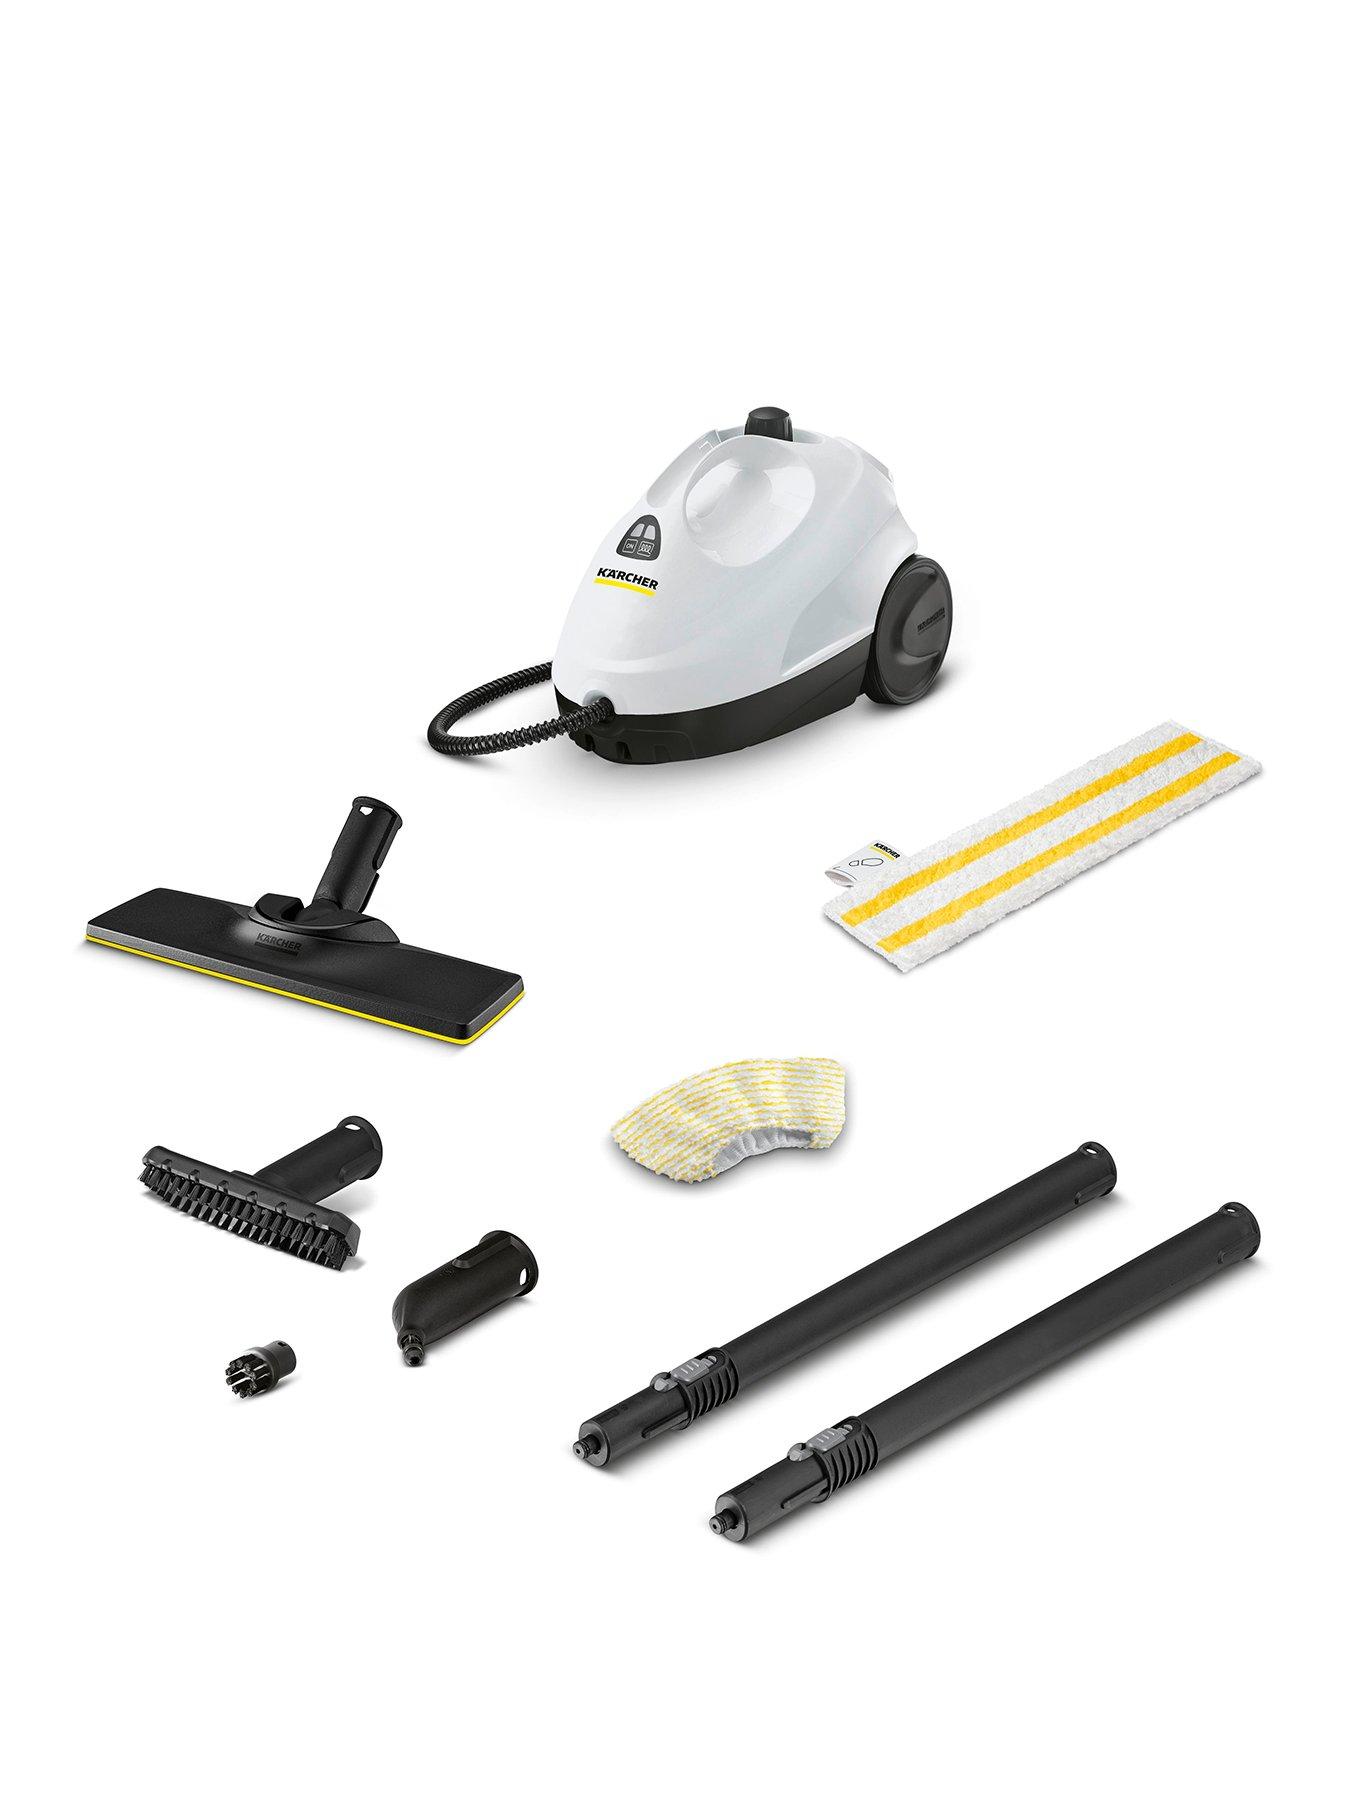 KÄRCHER STEAM CLEANER SC 3 EasyFix I am absolutely in love with my ste